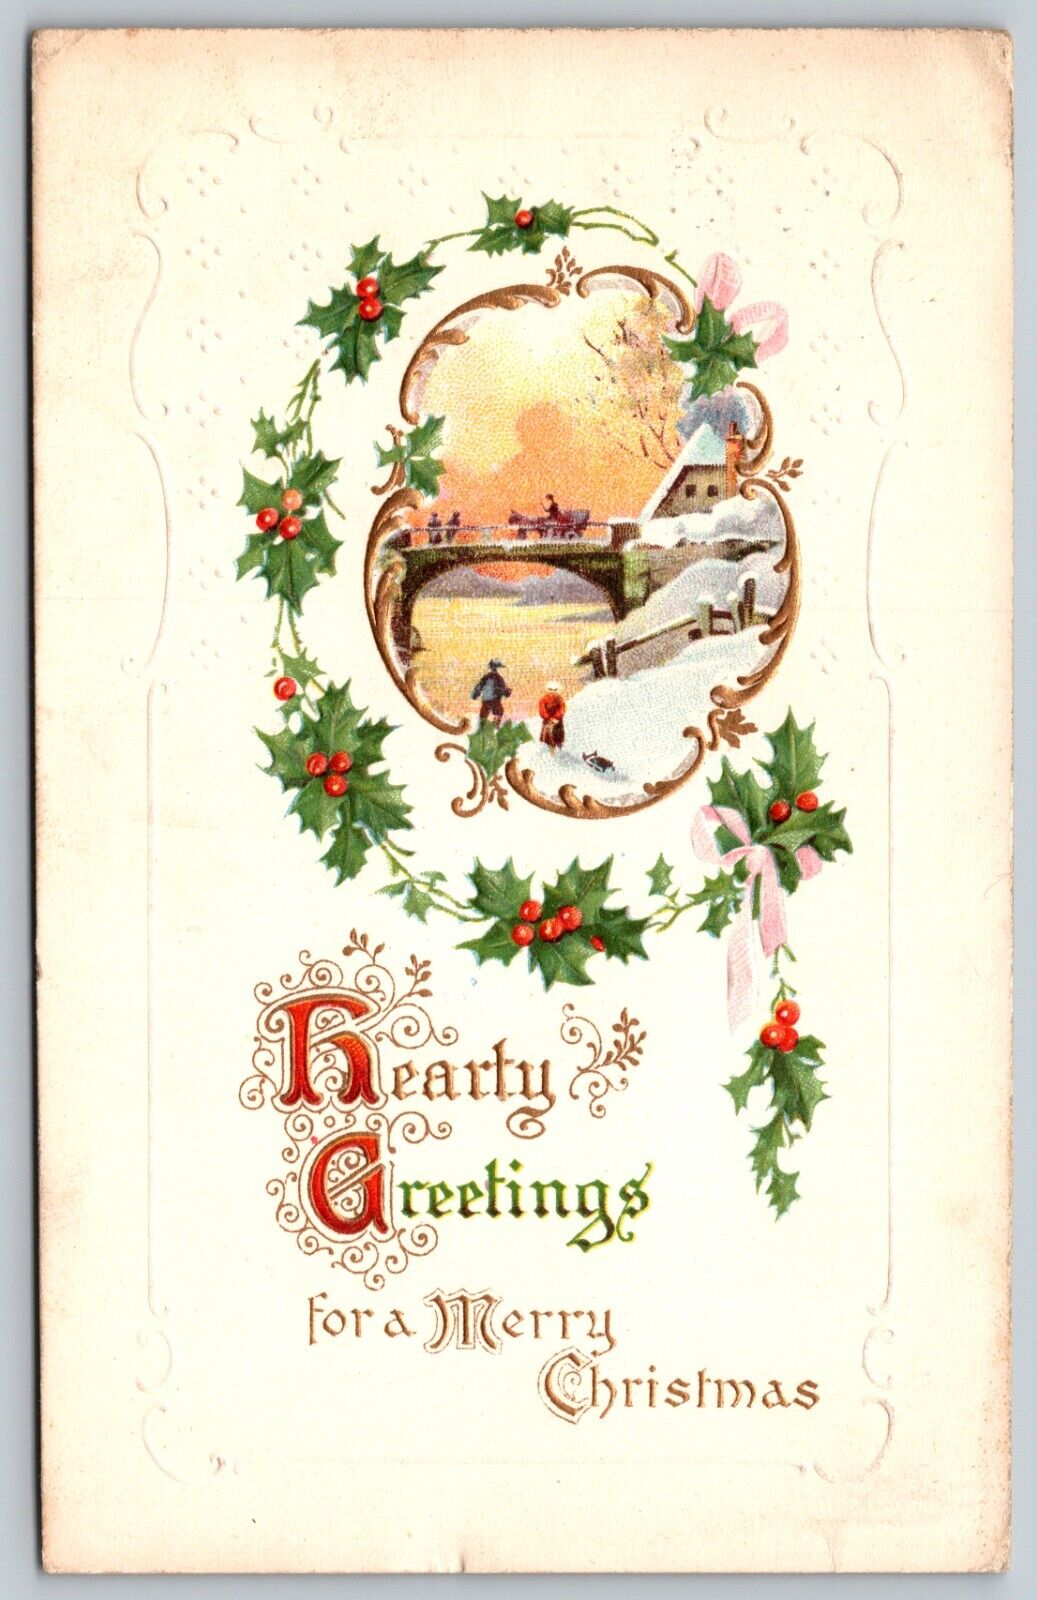 Hearty Greetings A Merry Christmas Holly Berries River Bridge Winter PM 1913